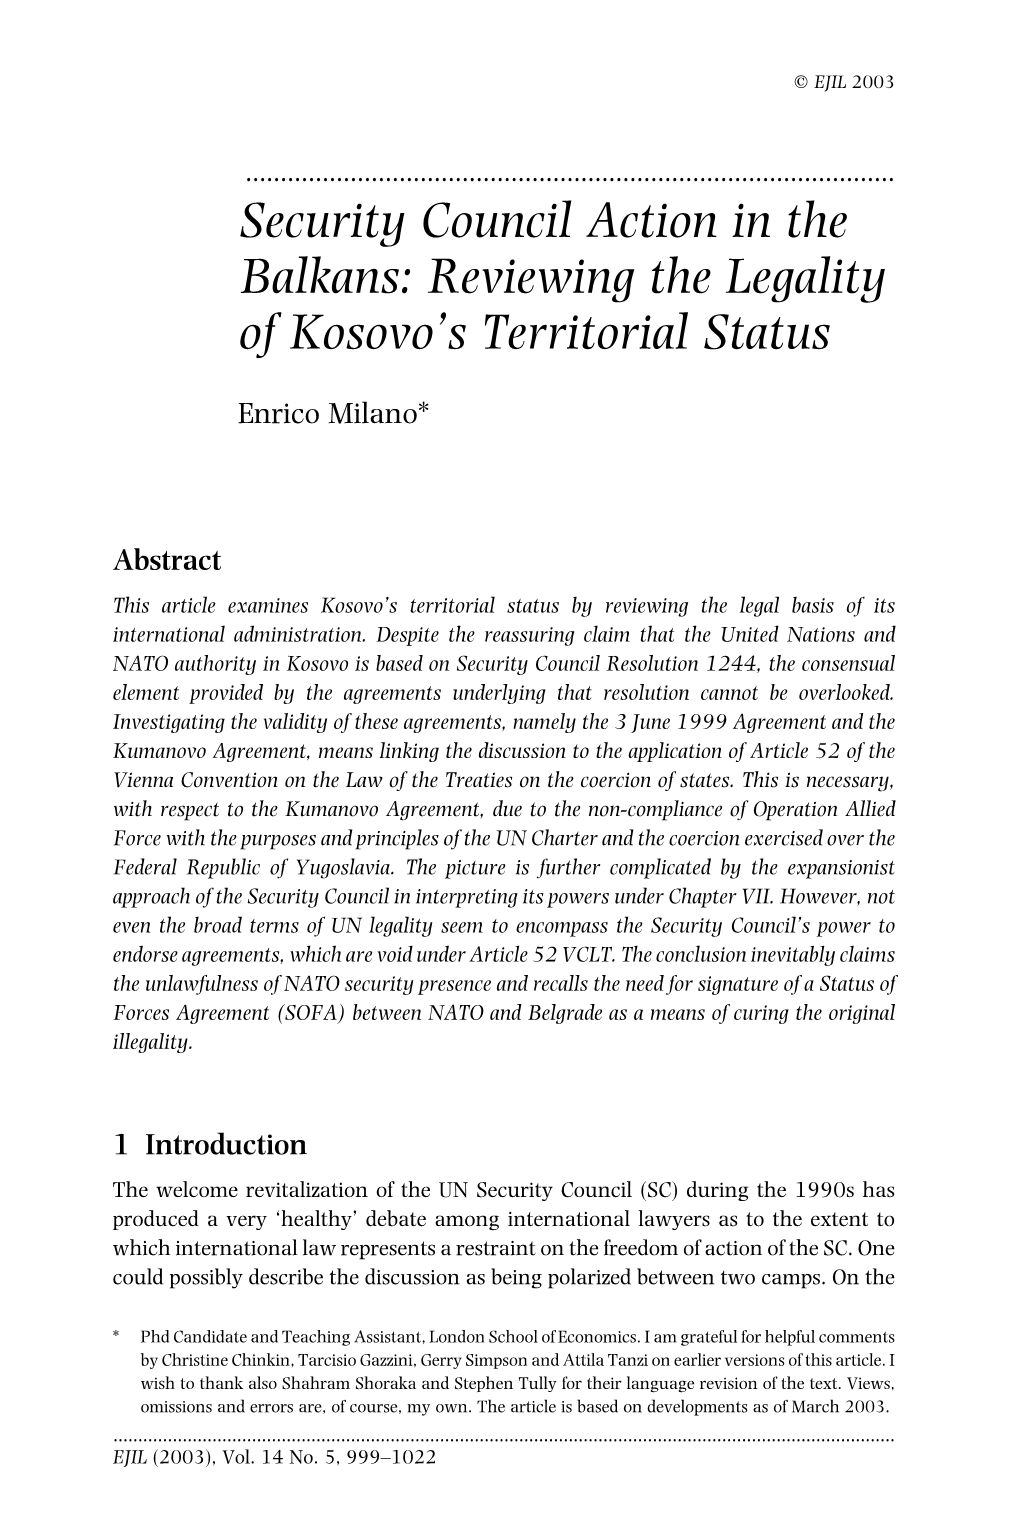 Security Council Action in the Balkans: Reviewing the Legality of Kosovo’S Territorial Status